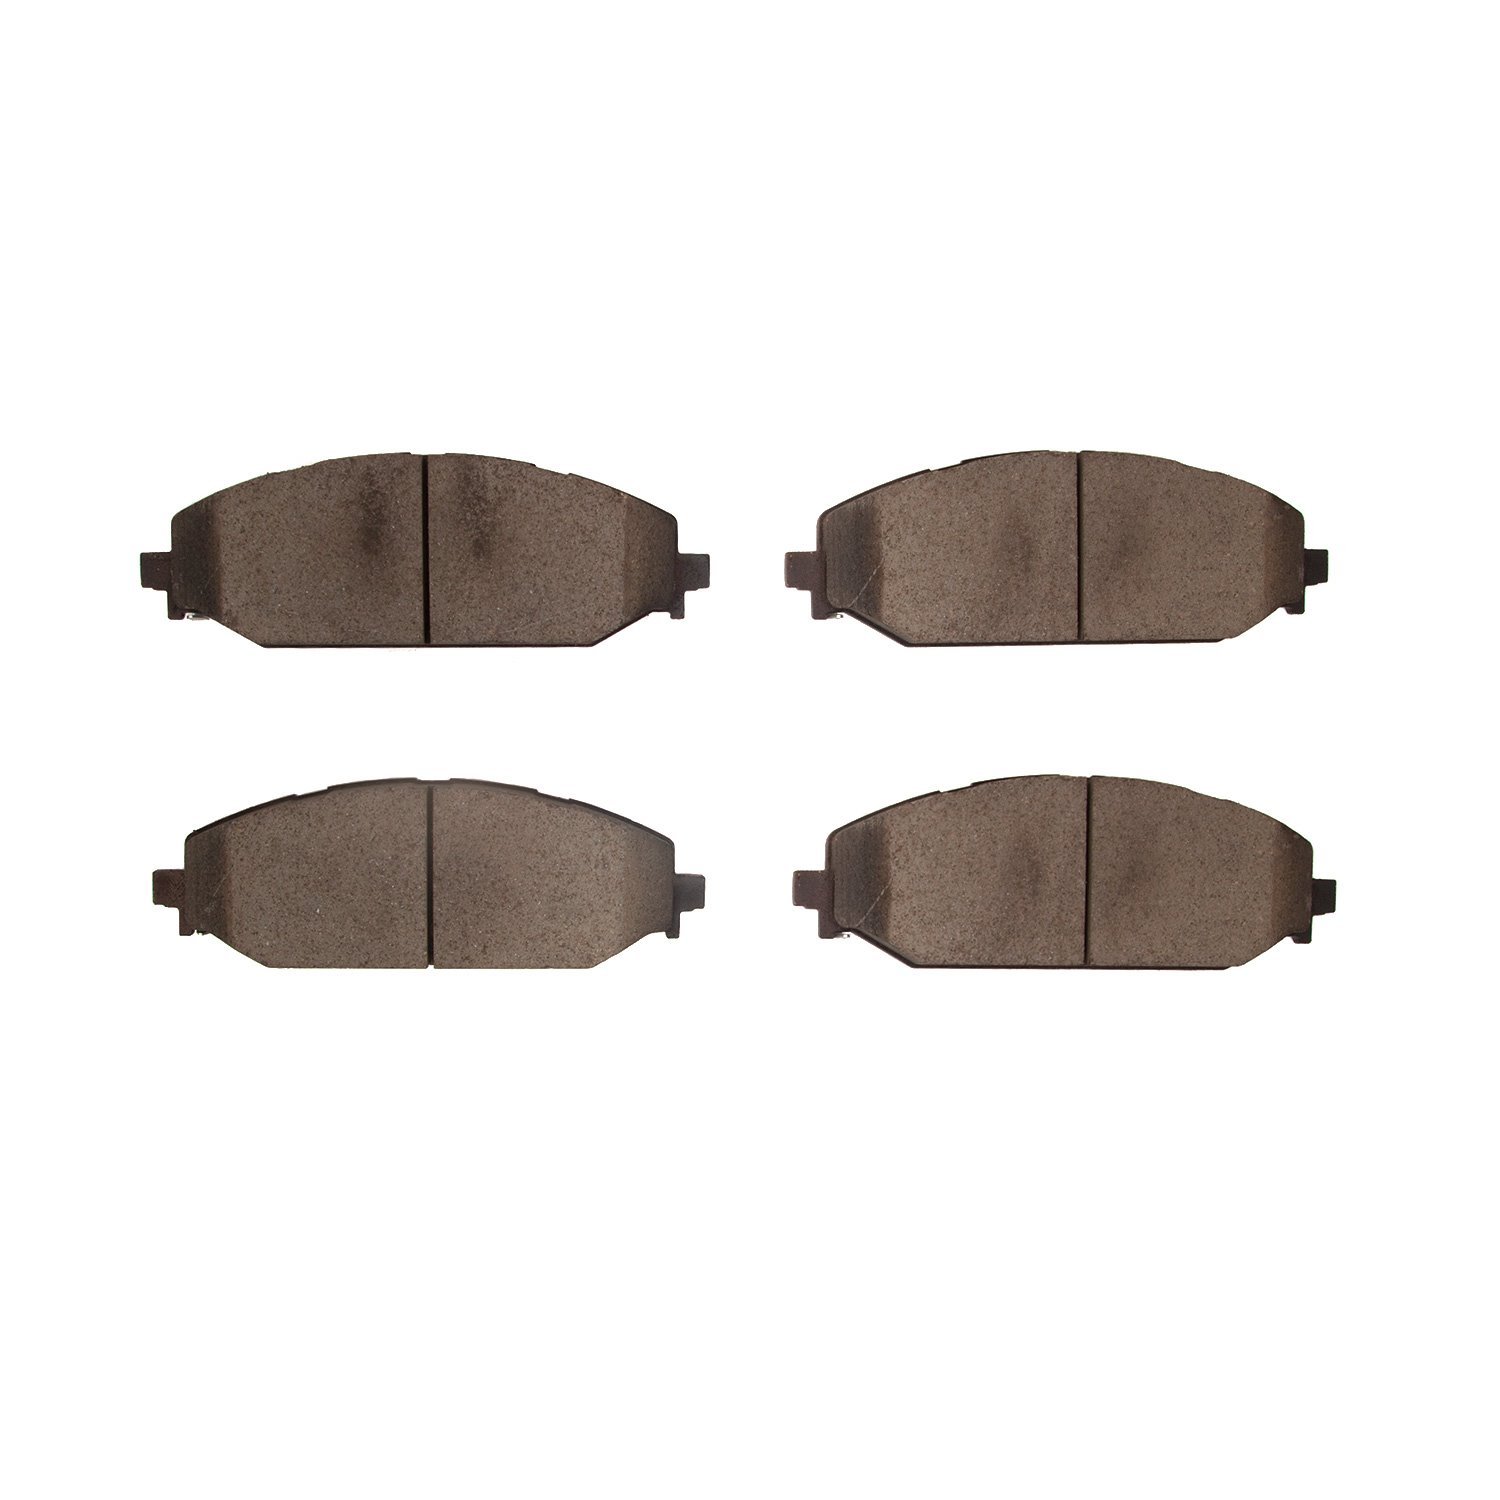 Performance Off-Road/Tow Brake Pads, Fits Select Mopar, Position: Front